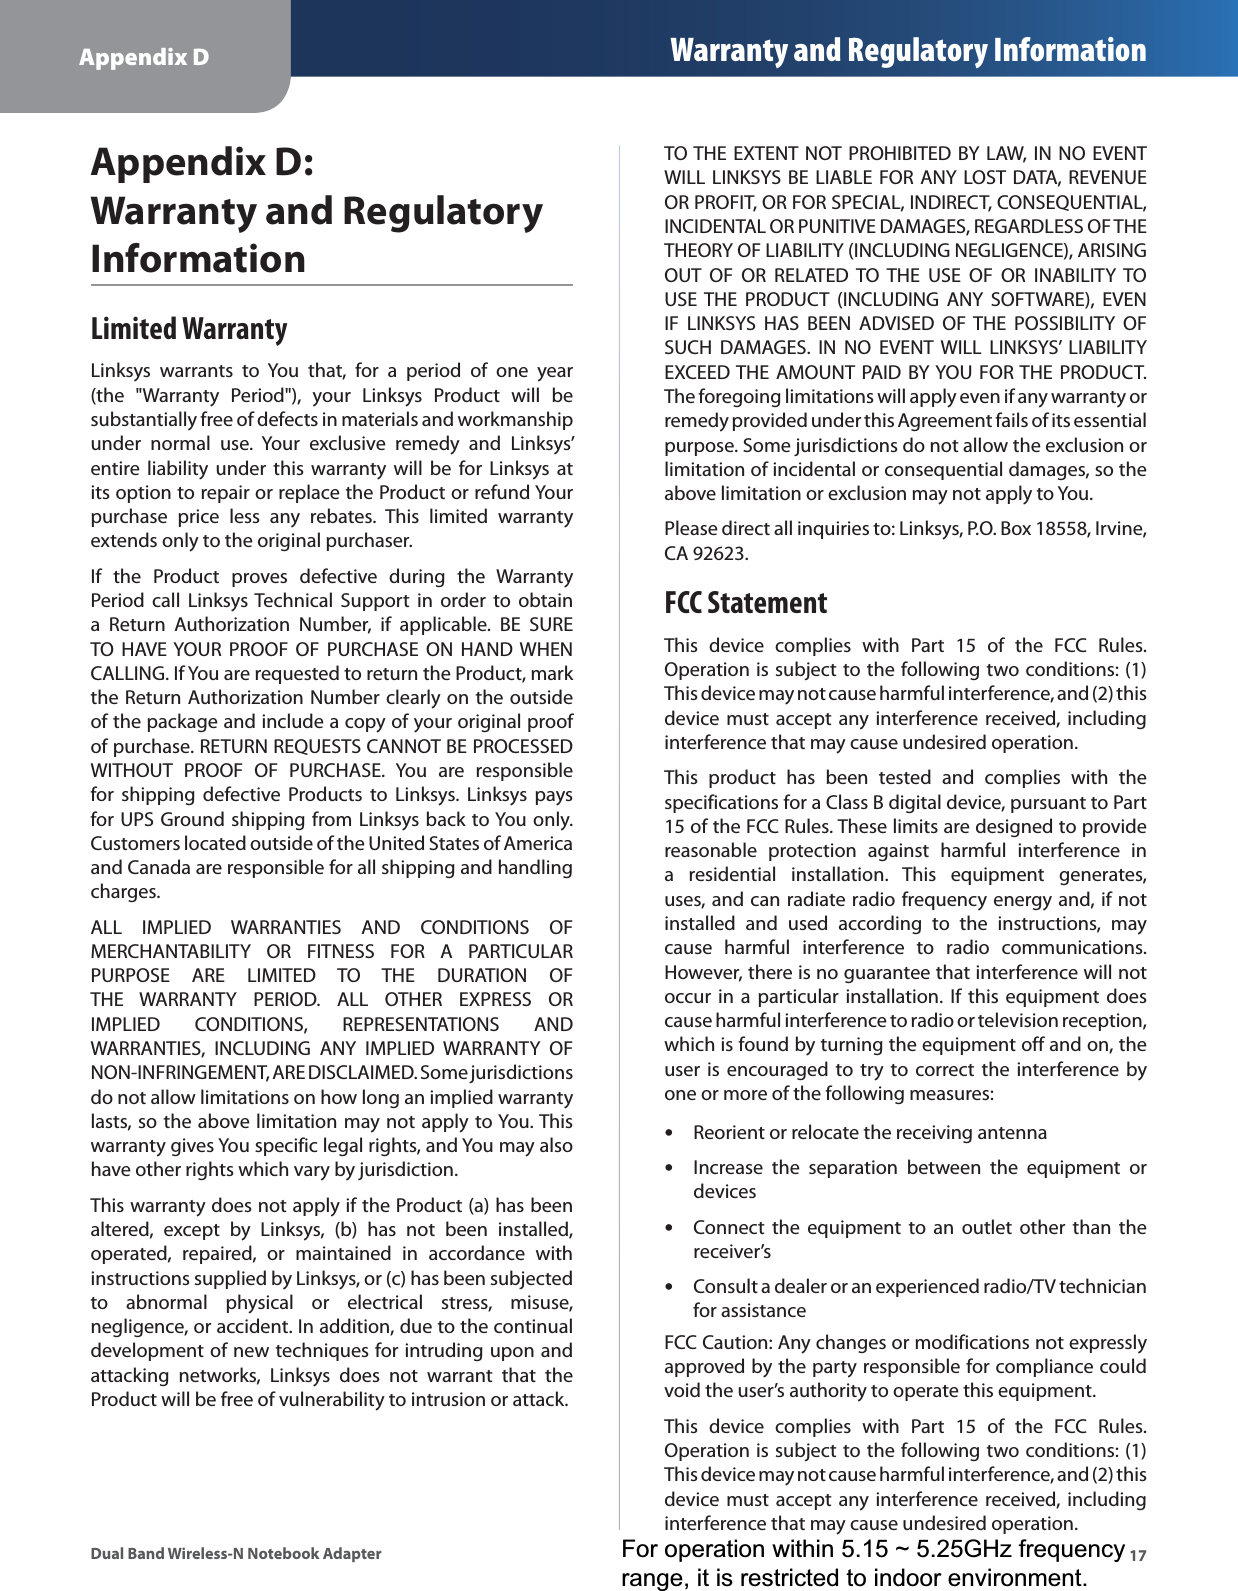 Appendix D Warranty and Regulatory Information17Dual Band Wireless-N Notebook AdapterAppendix D: Warranty and Regulatory InformationLimited WarrantyLinksys warrants to You that, for a period of one year (the &quot;Warranty Period&quot;), your Linksys Product will be substantially free of defects in materials and workmanship under normal use. Your exclusive remedy and Linksys’ entire liability under this warranty will be for Linksys at its option to repair or replace the Product or refund Your purchase price less any rebates. This limited warranty extends only to the original purchaser. If the Product proves defective during the Warranty Period call Linksys Technical Support in order to obtain a Return Authorization Number, if applicable. BE SURE TO HAVE YOUR PROOF OF PURCHASE ON HAND WHEN CALLING. If You are requested to return the Product, mark the Return Authorization Number clearly on the outside of the package and include a copy of your original proof of purchase. RETURN REQUESTS CANNOT BE PROCESSED WITHOUT PROOF OF PURCHASE. You are responsible for shipping defective Products to Linksys. Linksys pays for UPS Ground shipping from Linksys back to You only. Customers located outside of the United States of America and Canada are responsible for all shipping and handling charges. ALL IMPLIED WARRANTIES AND CONDITIONS OF MERCHANTABILITY OR FITNESS FOR A PARTICULAR PURPOSE ARE LIMITED TO THE DURATION OF THE WARRANTY PERIOD. ALL OTHER EXPRESS OR IMPLIED CONDITIONS, REPRESENTATIONS AND WARRANTIES, INCLUDING ANY IMPLIED WARRANTY OF NON-INFRINGEMENT, ARE DISCLAIMED. Some jurisdictions do not allow limitations on how long an implied warranty lasts, so the above limitation may not apply to You. This warranty gives You specific legal rights, and You may also have other rights which vary by jurisdiction.This warranty does not apply if the Product (a) has been altered, except by Linksys, (b) has not been installed, operated, repaired, or maintained in accordance with instructions supplied by Linksys, or (c) has been subjected to abnormal physical or electrical stress, misuse, negligence, or accident. In addition, due to the continual development of new techniques for intruding upon and attacking networks, Linksys does not warrant that the Product will be free of vulnerability to intrusion or attack.TO THE EXTENT NOT PROHIBITED BY LAW, IN NO EVENT WILL LINKSYS BE LIABLE FOR ANY LOST DATA, REVENUE OR PROFIT, OR FOR SPECIAL, INDIRECT, CONSEQUENTIAL, INCIDENTAL OR PUNITIVE DAMAGES, REGARDLESS OF THE THEORY OF LIABILITY (INCLUDING NEGLIGENCE), ARISING OUT OF OR RELATED TO THE USE OF OR INABILITY TO USE THE PRODUCT (INCLUDING ANY SOFTWARE), EVEN IF LINKSYS HAS BEEN ADVISED OF THE POSSIBILITY OF SUCH DAMAGES. IN NO EVENT WILL LINKSYS’ LIABILITY EXCEED THE AMOUNT PAID BY YOU FOR THE PRODUCT. The foregoing limitations will apply even if any warranty or remedy provided under this Agreement fails of its essential purpose. Some jurisdictions do not allow the exclusion or limitation of incidental or consequential damages, so the above limitation or exclusion may not apply to You.Please direct all inquiries to: Linksys, P.O. Box 18558, Irvine, CA 92623.FCC StatementThis device complies with Part 15 of the FCC Rules. Operation is subject to the following two conditions: (1) This device may not cause harmful interference, and (2) this device must accept any interference received, including interference that may cause undesired operation.This product has been tested and complies with the specifications for a Class B digital device, pursuant to Part 15 of the FCC Rules. These limits are designed to provide reasonable protection against harmful interference in a residential installation. This equipment generates, uses, and can radiate radio frequency energy and, if not installed and used according to the instructions, may cause harmful interference to radio communications. However, there is no guarantee that interference will not occur in a particular installation. If this equipment does cause harmful interference to radio or television reception, which is found by turning the equipment off and on, the user is encouraged to try to correct the interference by one or more of the following measures:Reorient or relocate the receiving antennaIncrease the separation between the equipment or devicesConnect the equipment to an outlet other than the receiver’sConsult a dealer or an experienced radio/TV technician for assistanceFCC Caution: Any changes or modifications not expressly approved by the party responsible for compliance could void the user’s authority to operate this equipment.This device complies with Part 15 of the FCC Rules. Operation is subject to the following two conditions: (1) This device may not cause harmful interference, and (2) this device must accept any interference received, including interference that may cause undesired operation.••••For operation within 5.15 ~ 5.25GHz frequencyrange, it is restricted to indoor environment.